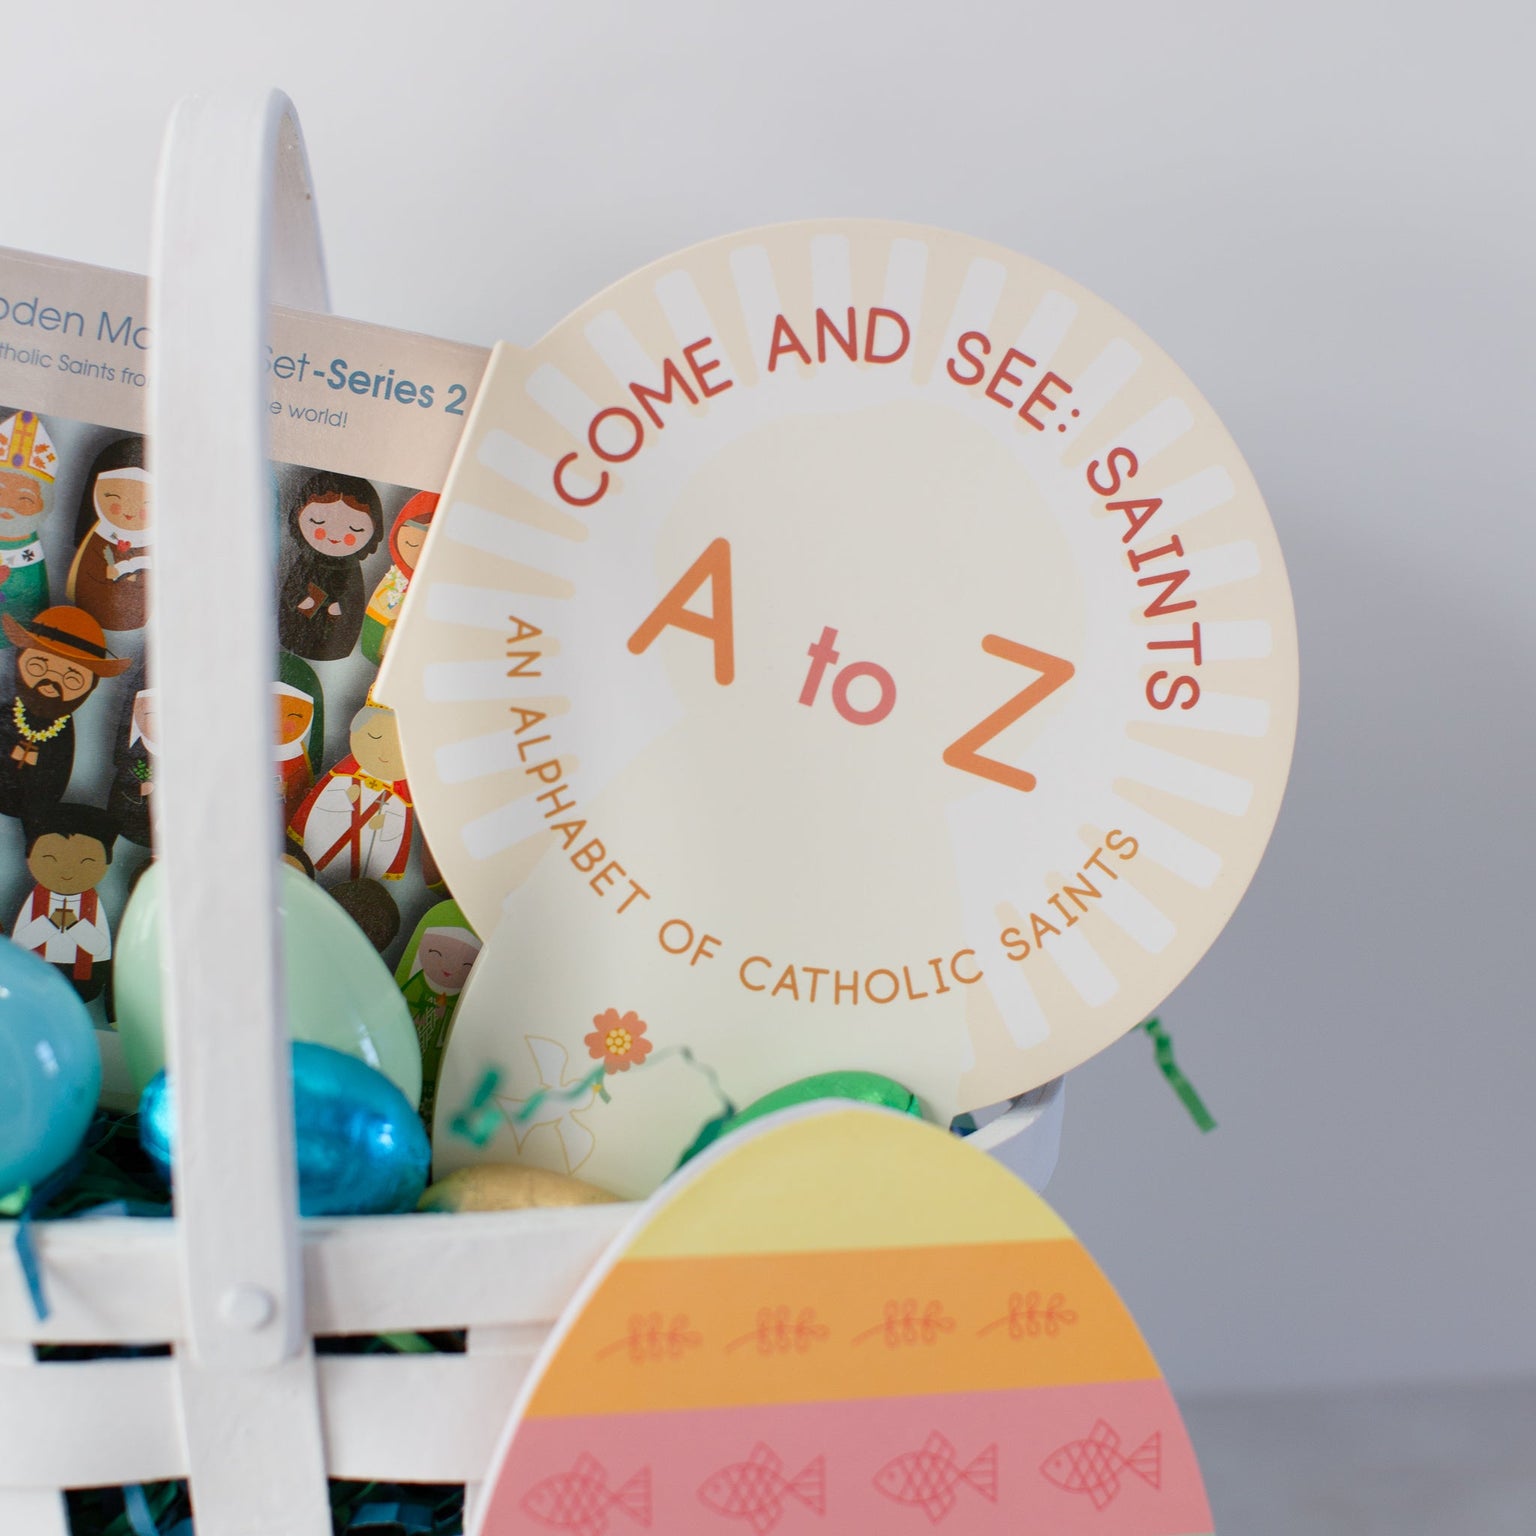 Come and See: Saints A to Z - An Alphabet of Catholic Saints - shaped board book